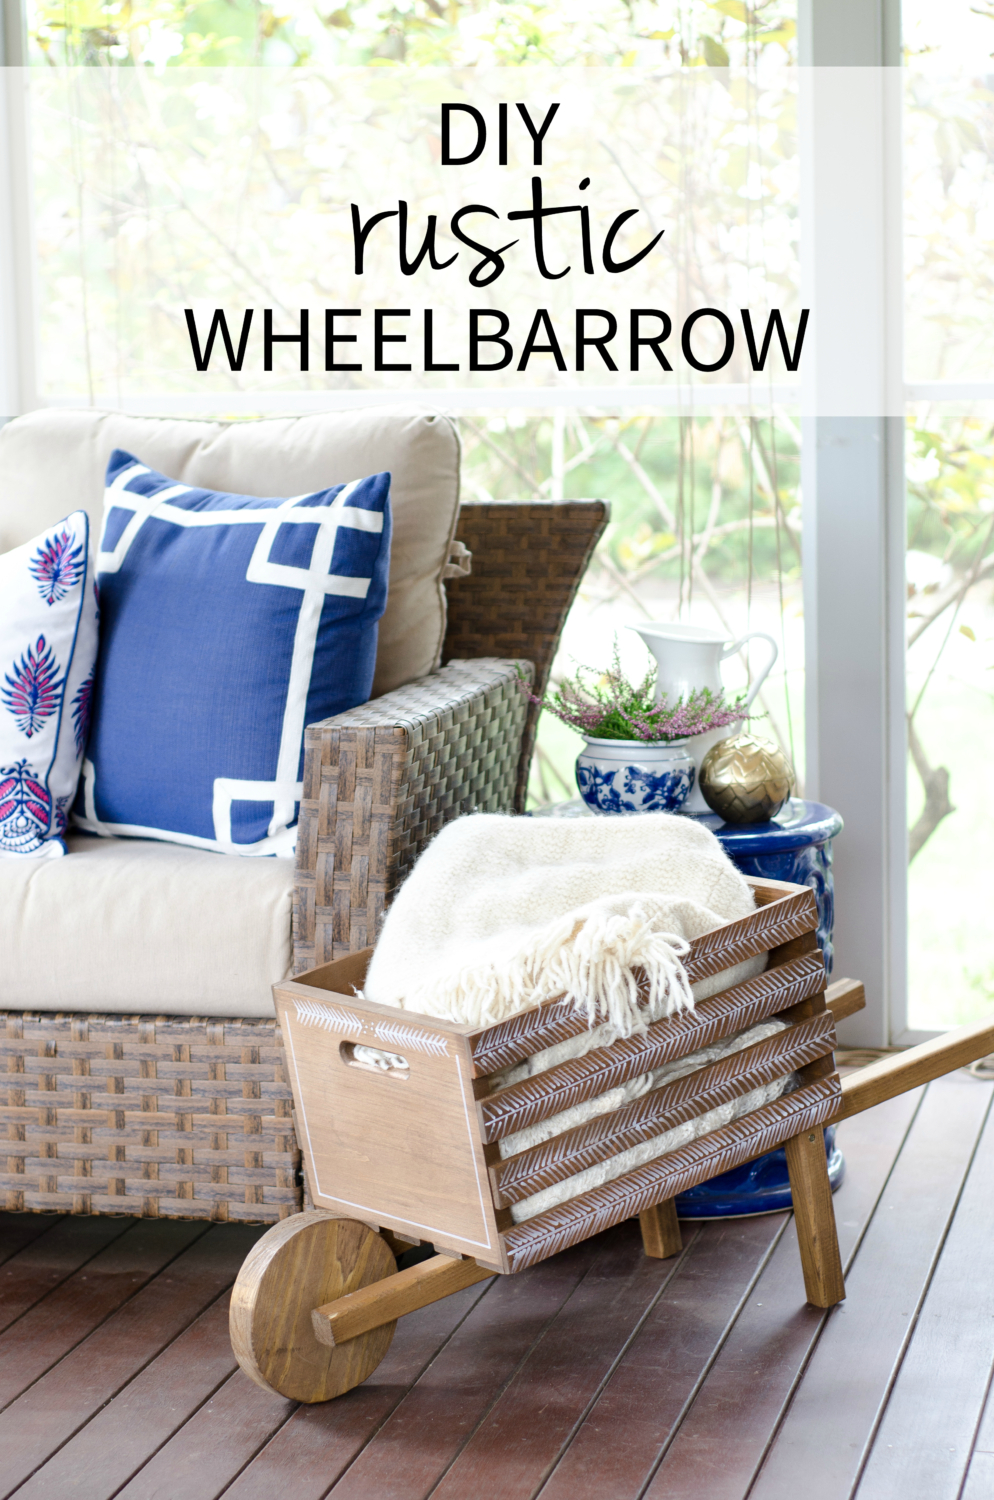 A DIY rustic wheelbarrow with a hand-painted herringbone pattern, perfect for all kinds of fall decorating! #DIHWorkshop #sponsored